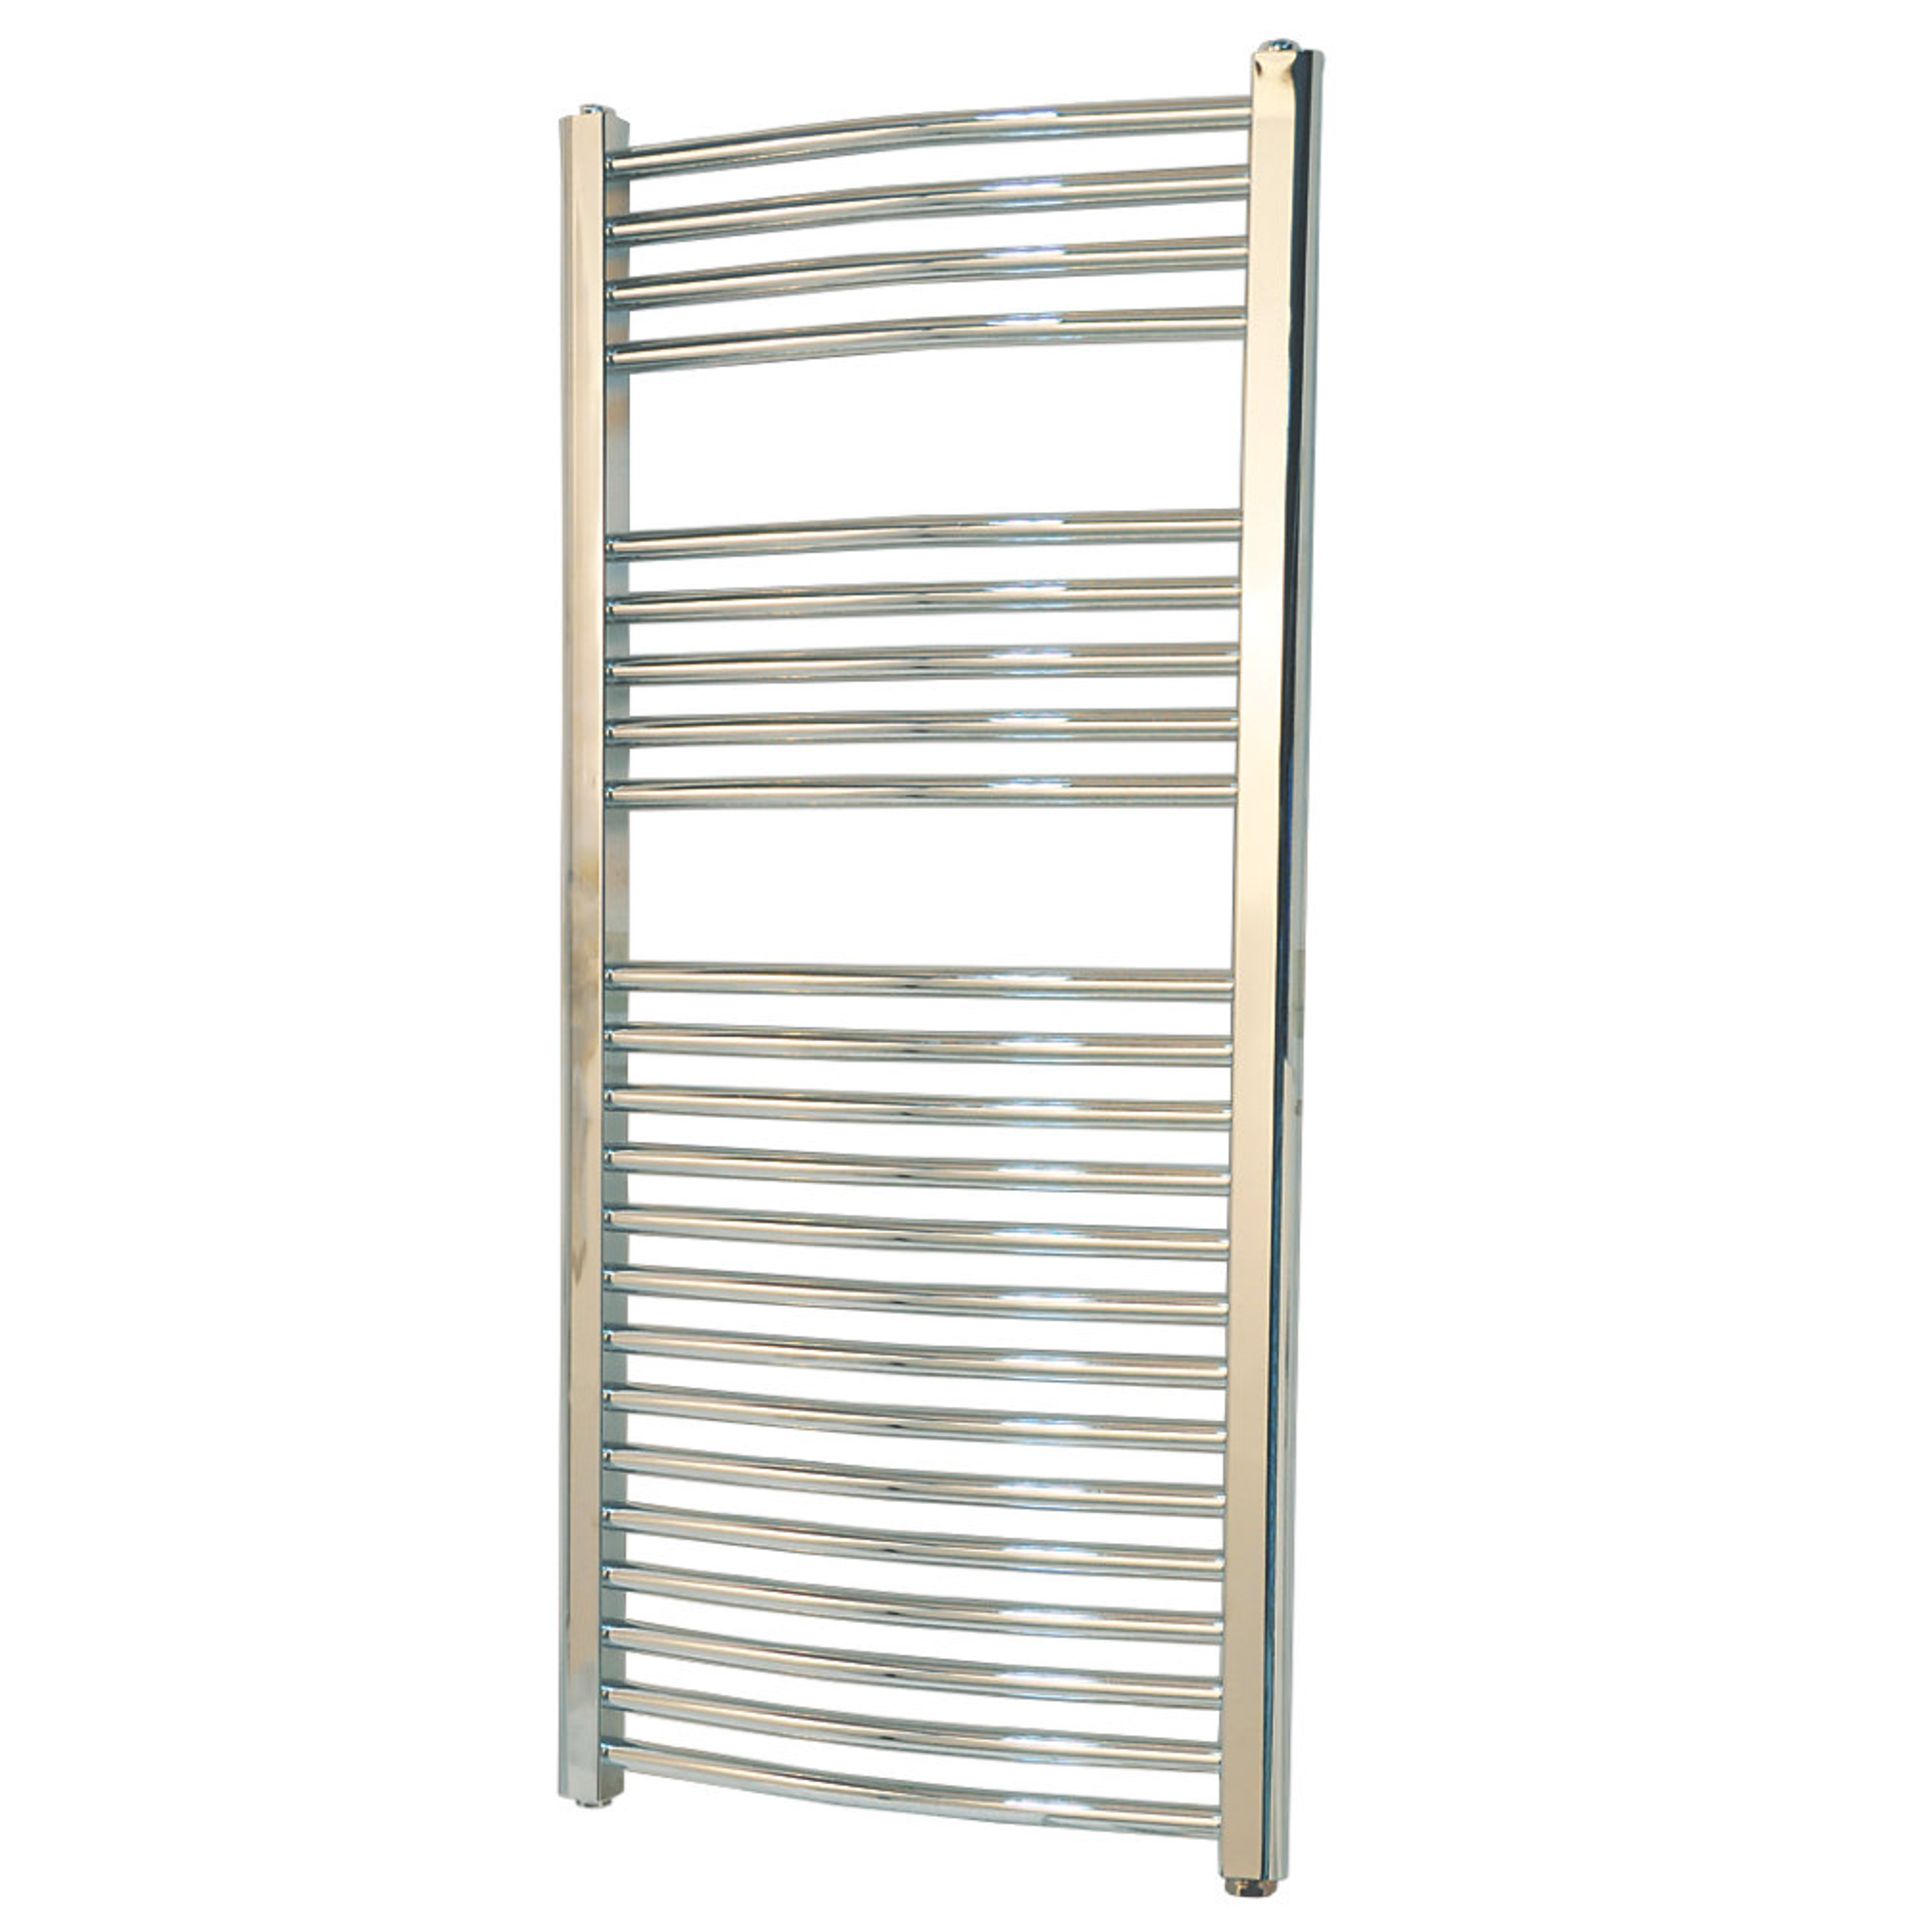 (XL97) 1100X500mm FLOMASTA CURVED ELECTRIC TOWEL RADIATOR Chrome. RRP £169.99. Electrical inst... - Image 2 of 2